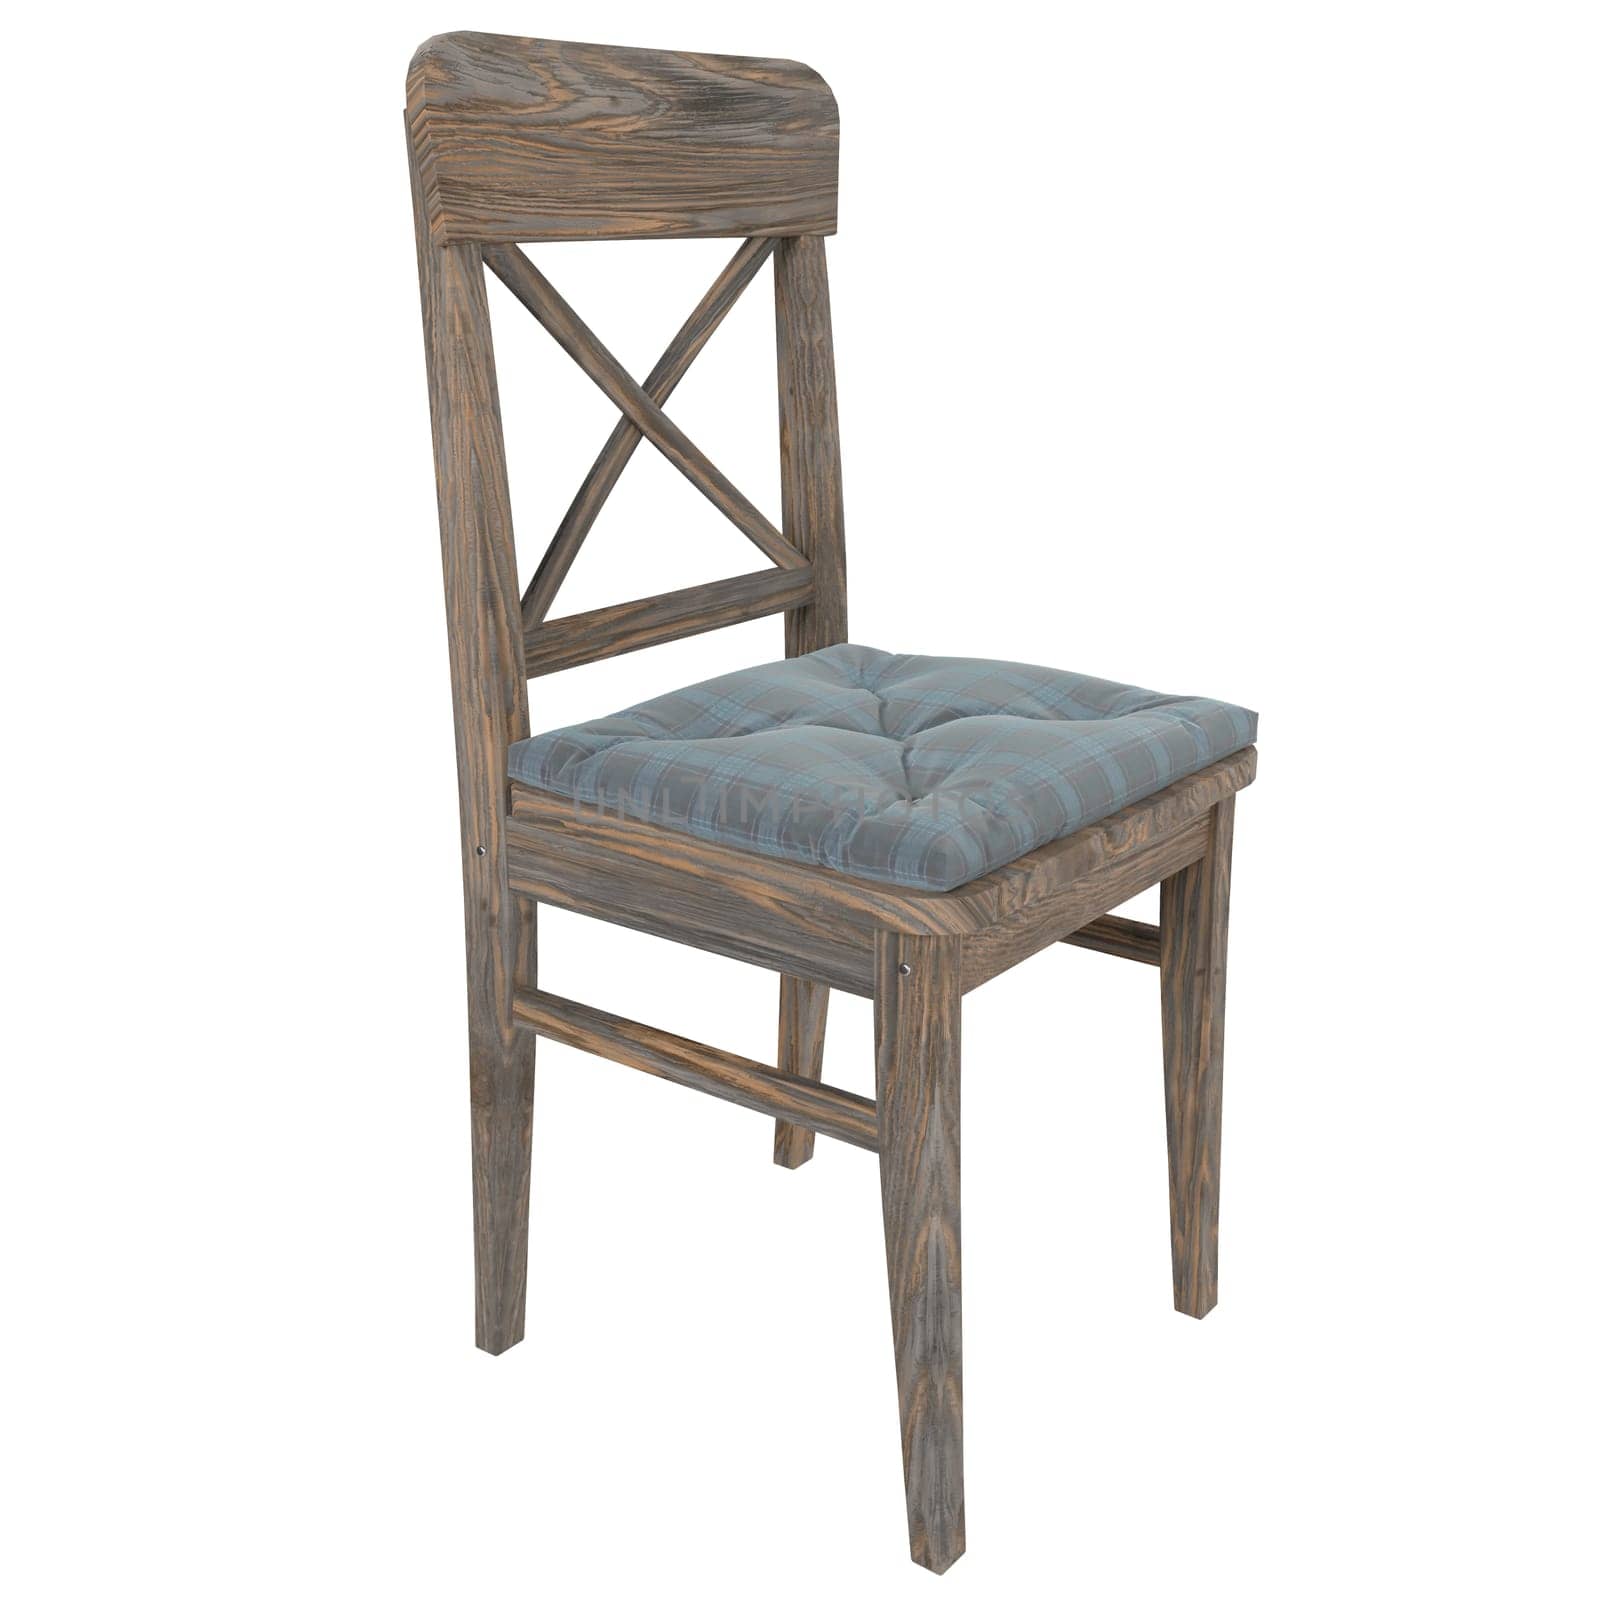 A wooden chair with a blue cushion and a wooden back. High quality 3d illustration